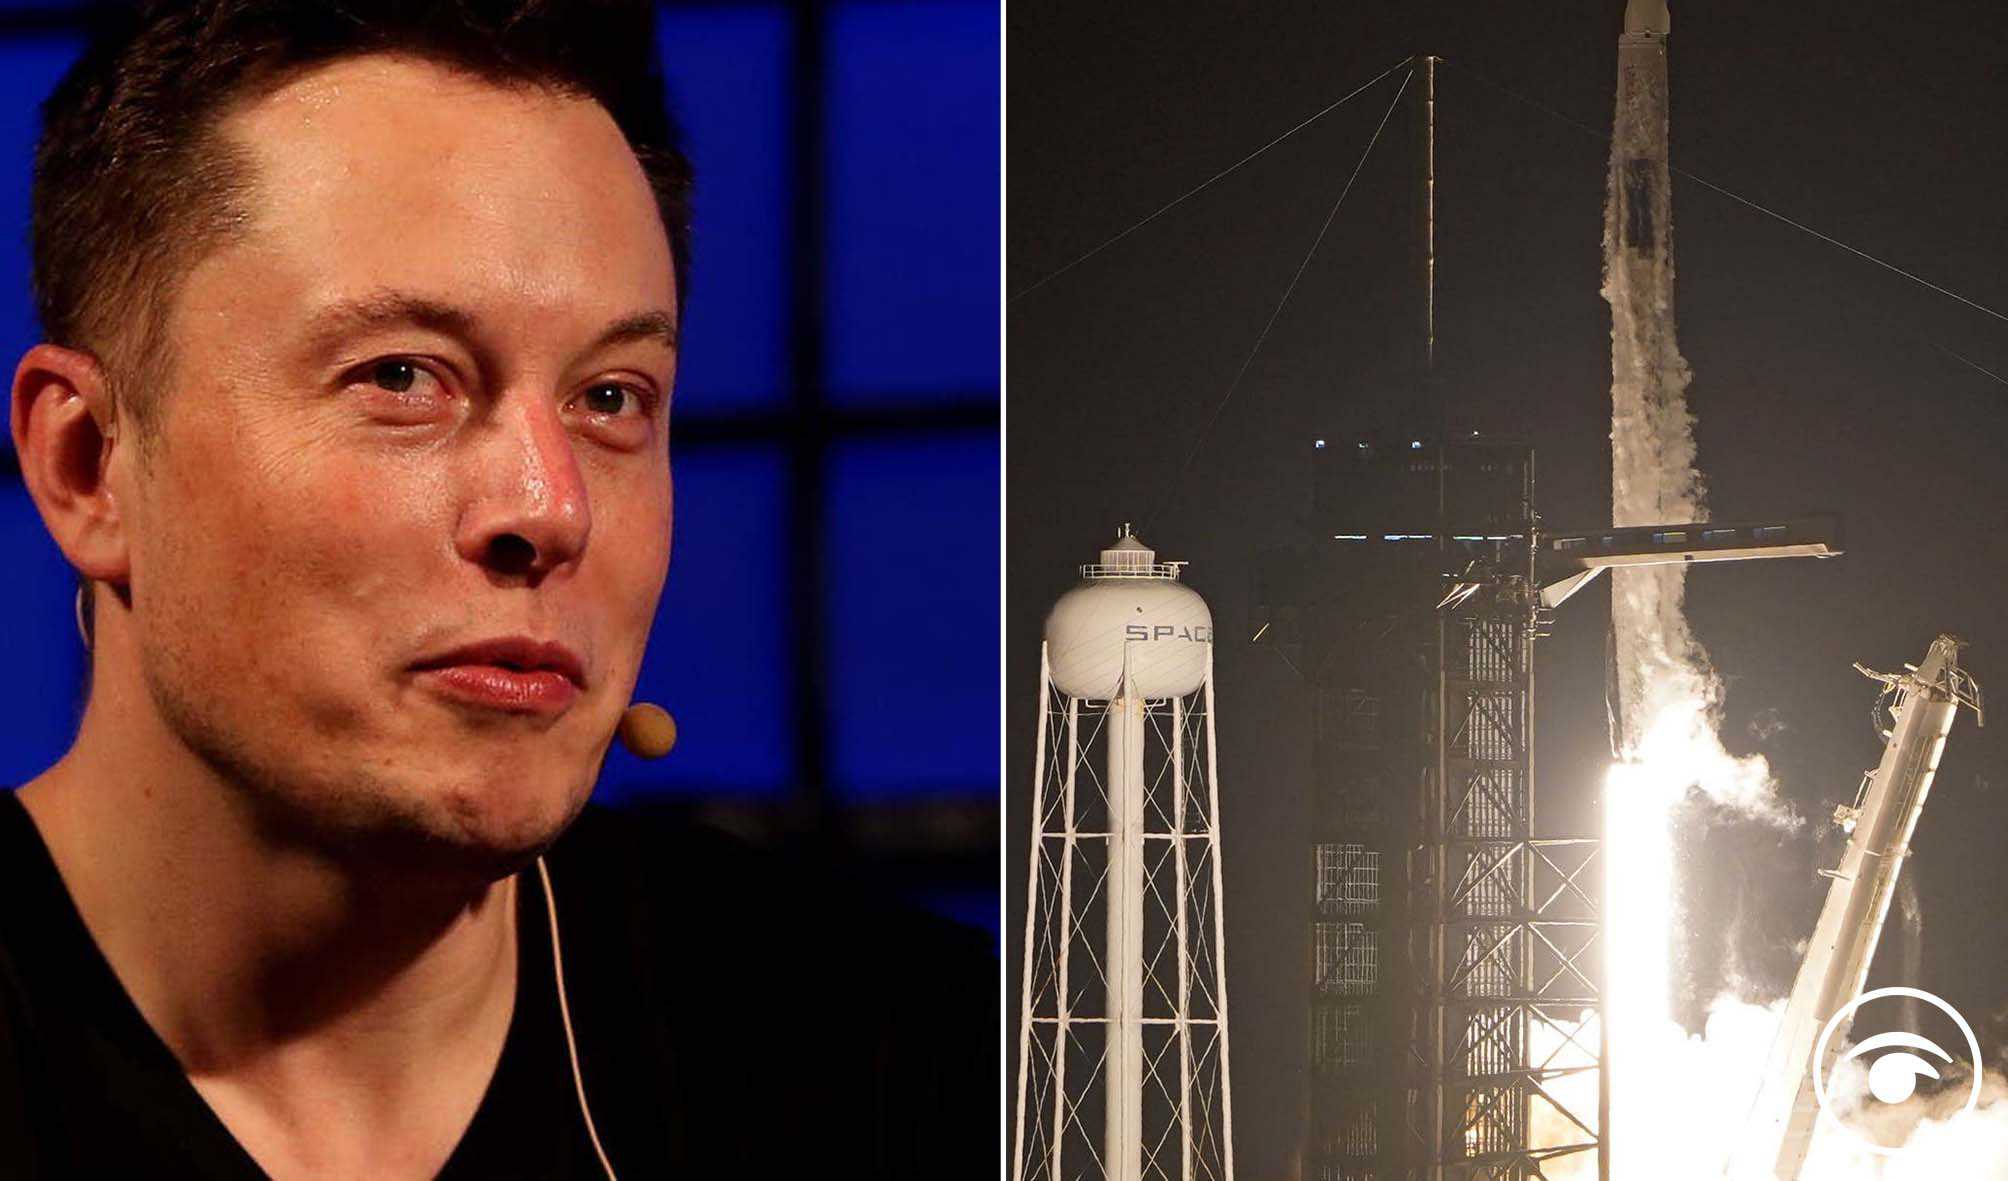 Reactions as Musk says ‘almost anyone’ can afford $100k to go to Mars